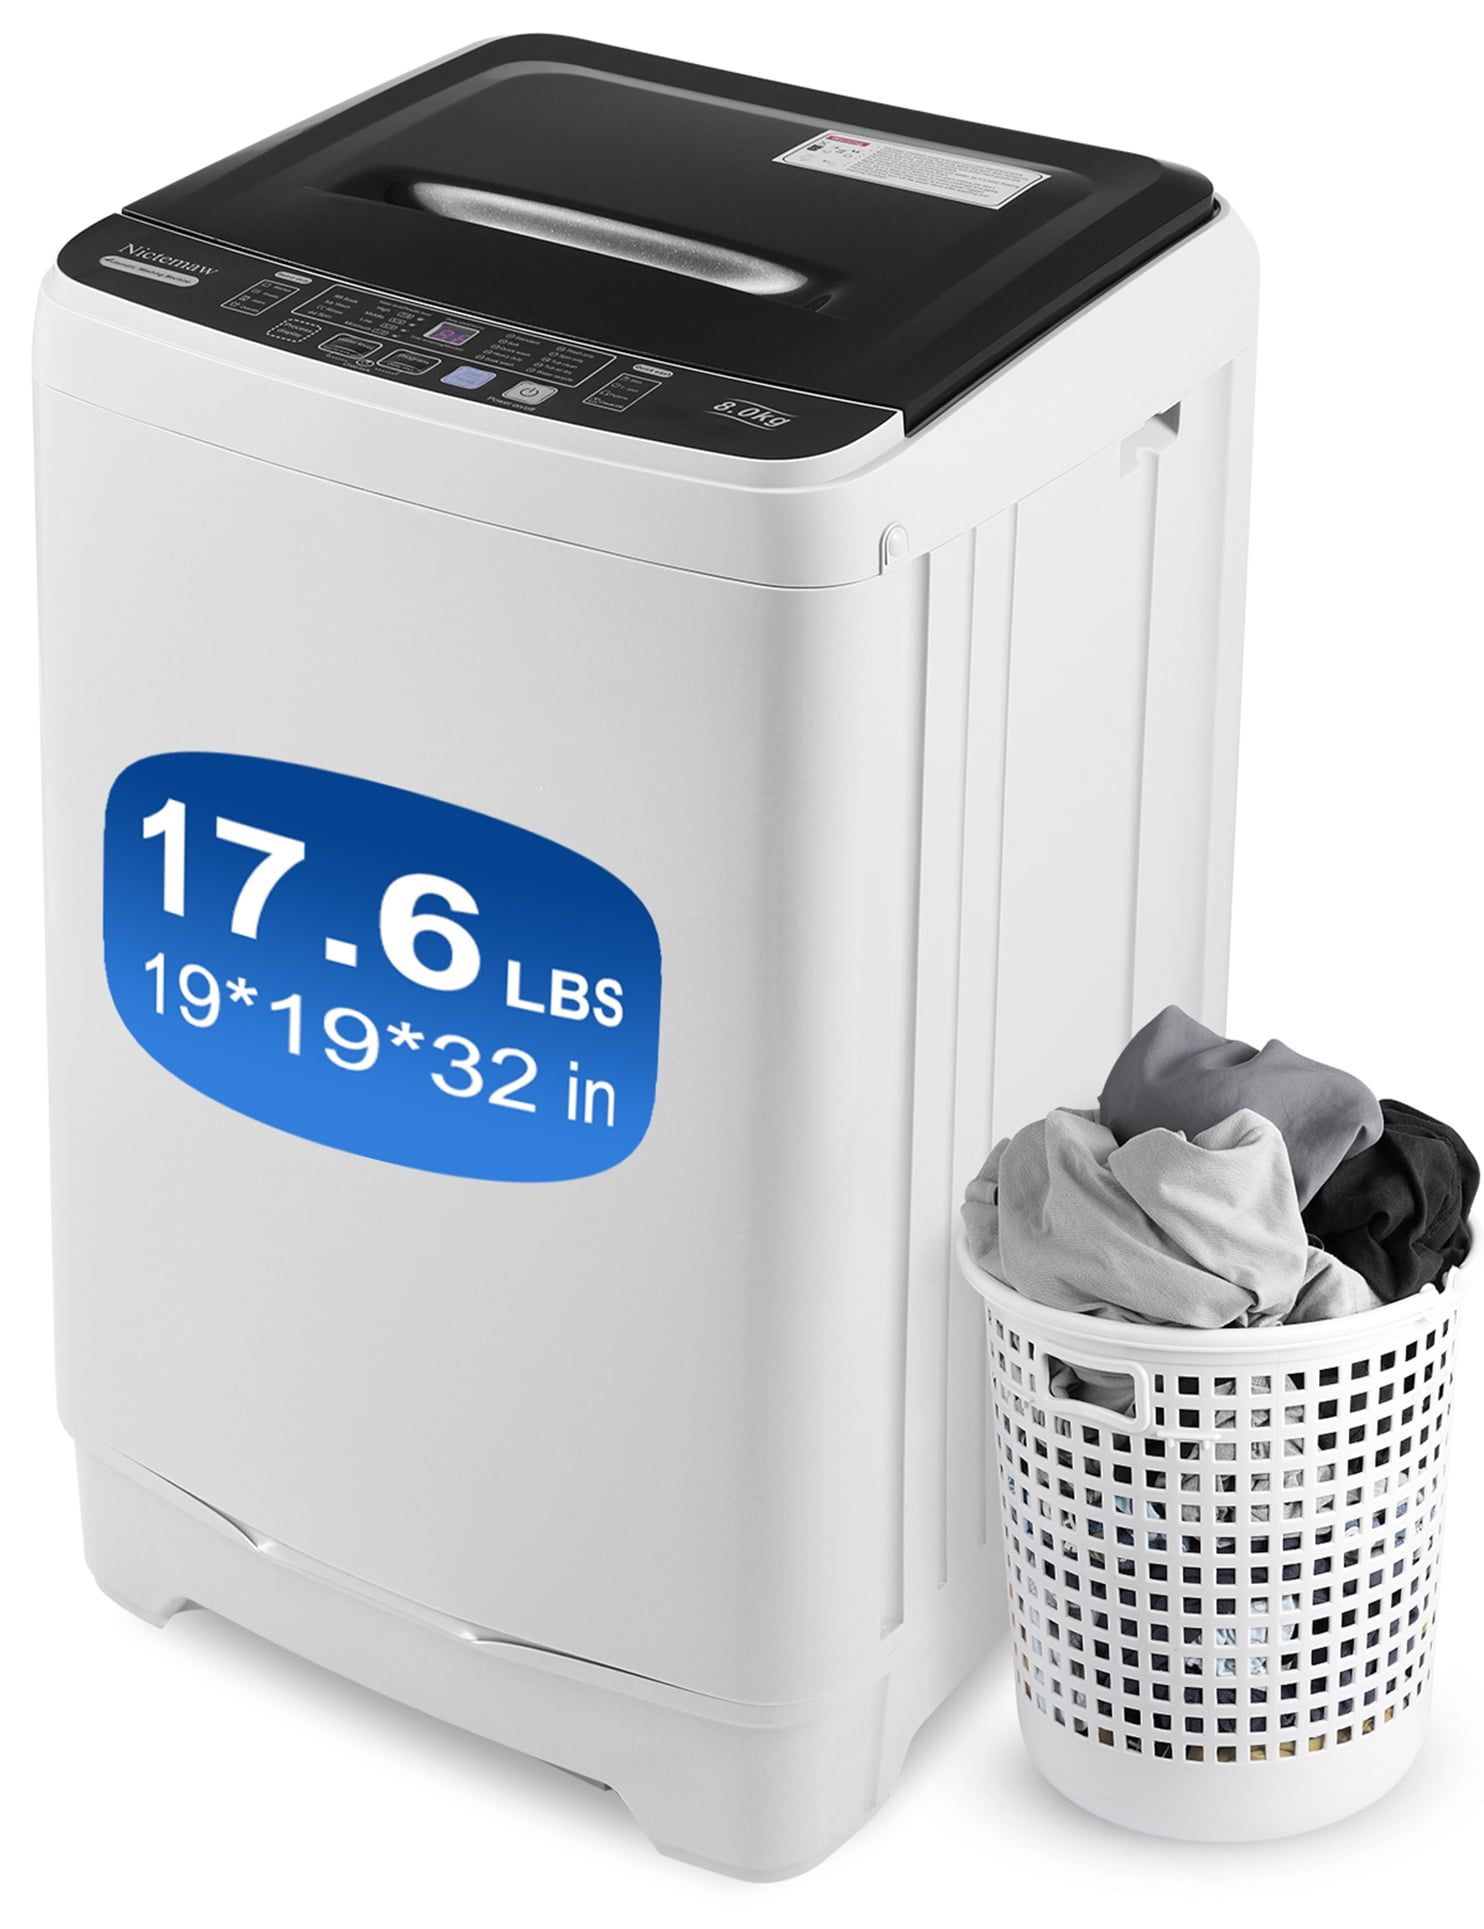 Tikmboex Portable Washing Machine, Built-In Drain Pump 17.6 lbs Capacity Compact Washer, Quick Wash, with Child Lock/Faucet Adapter, 1.9 CU.FT Fully